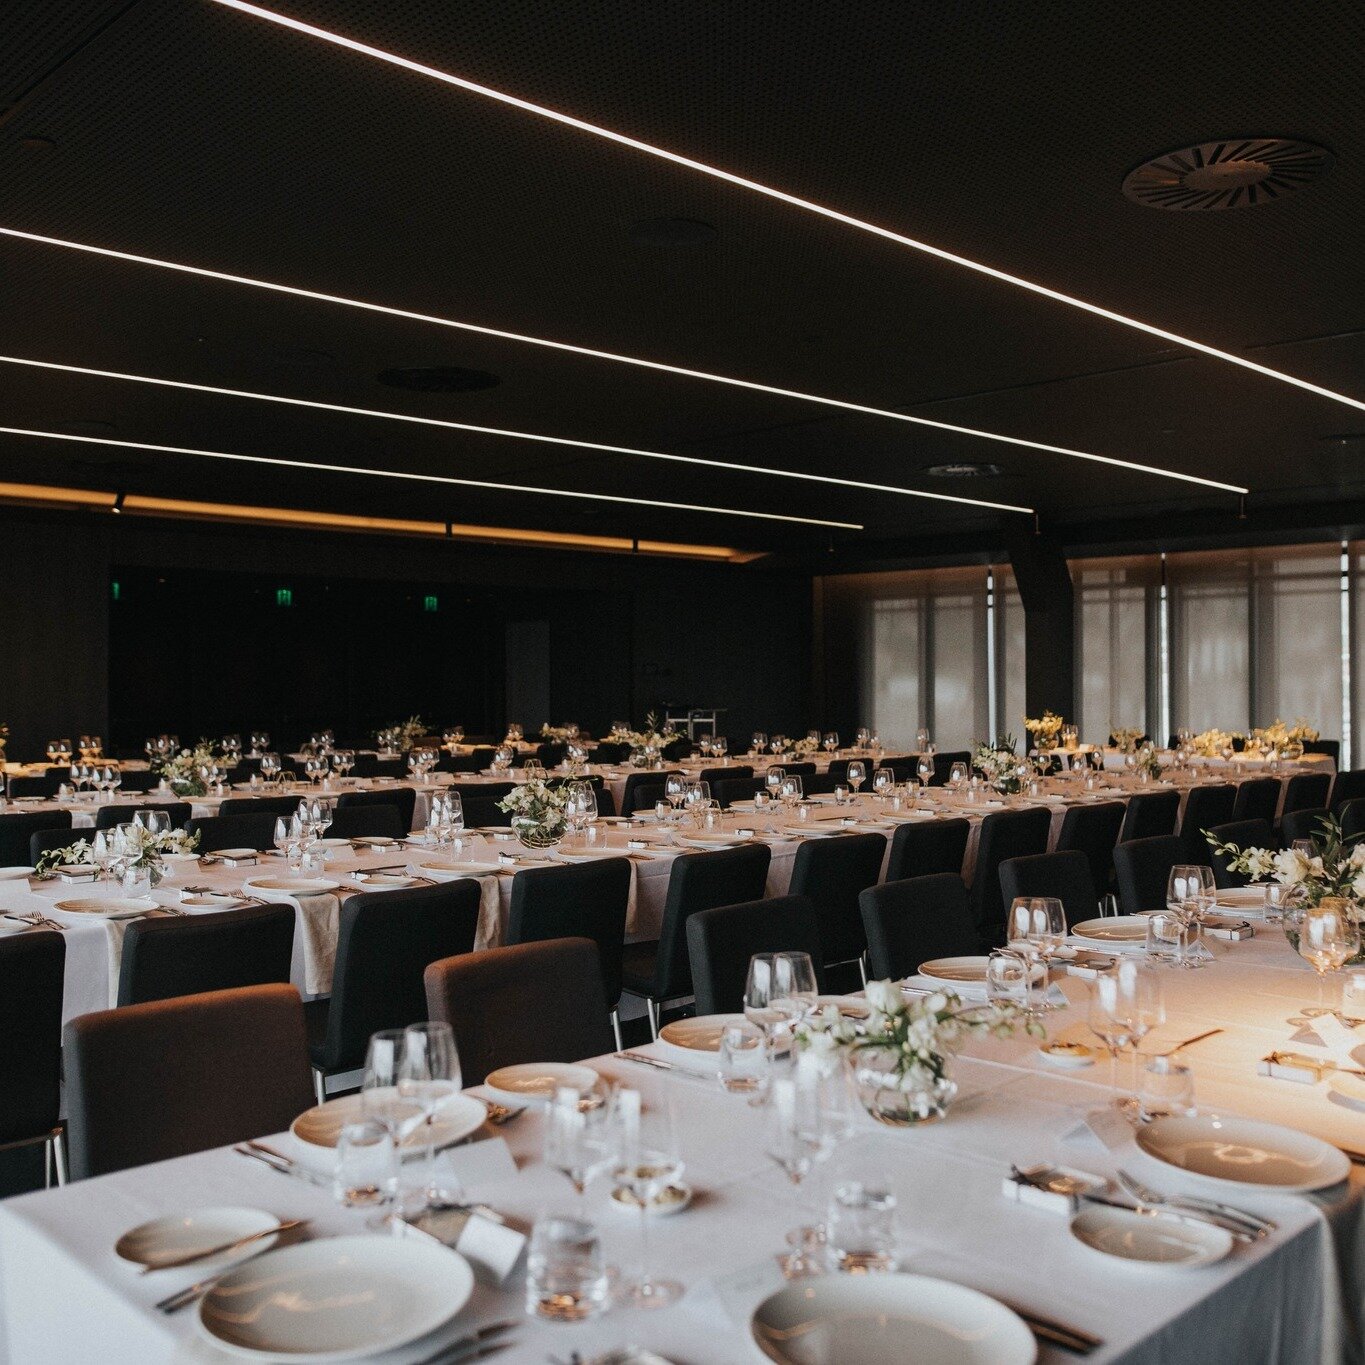 Make every moment memorable at AURA Event Space! Our stunning venue sets the stage for celebrations in style, framed by the panoramic beauty of Hobart City views. 🎉🎊🍽

Click on the link in the bio for an enquiry 🔗

#aurahobart #aurahobartwedding 